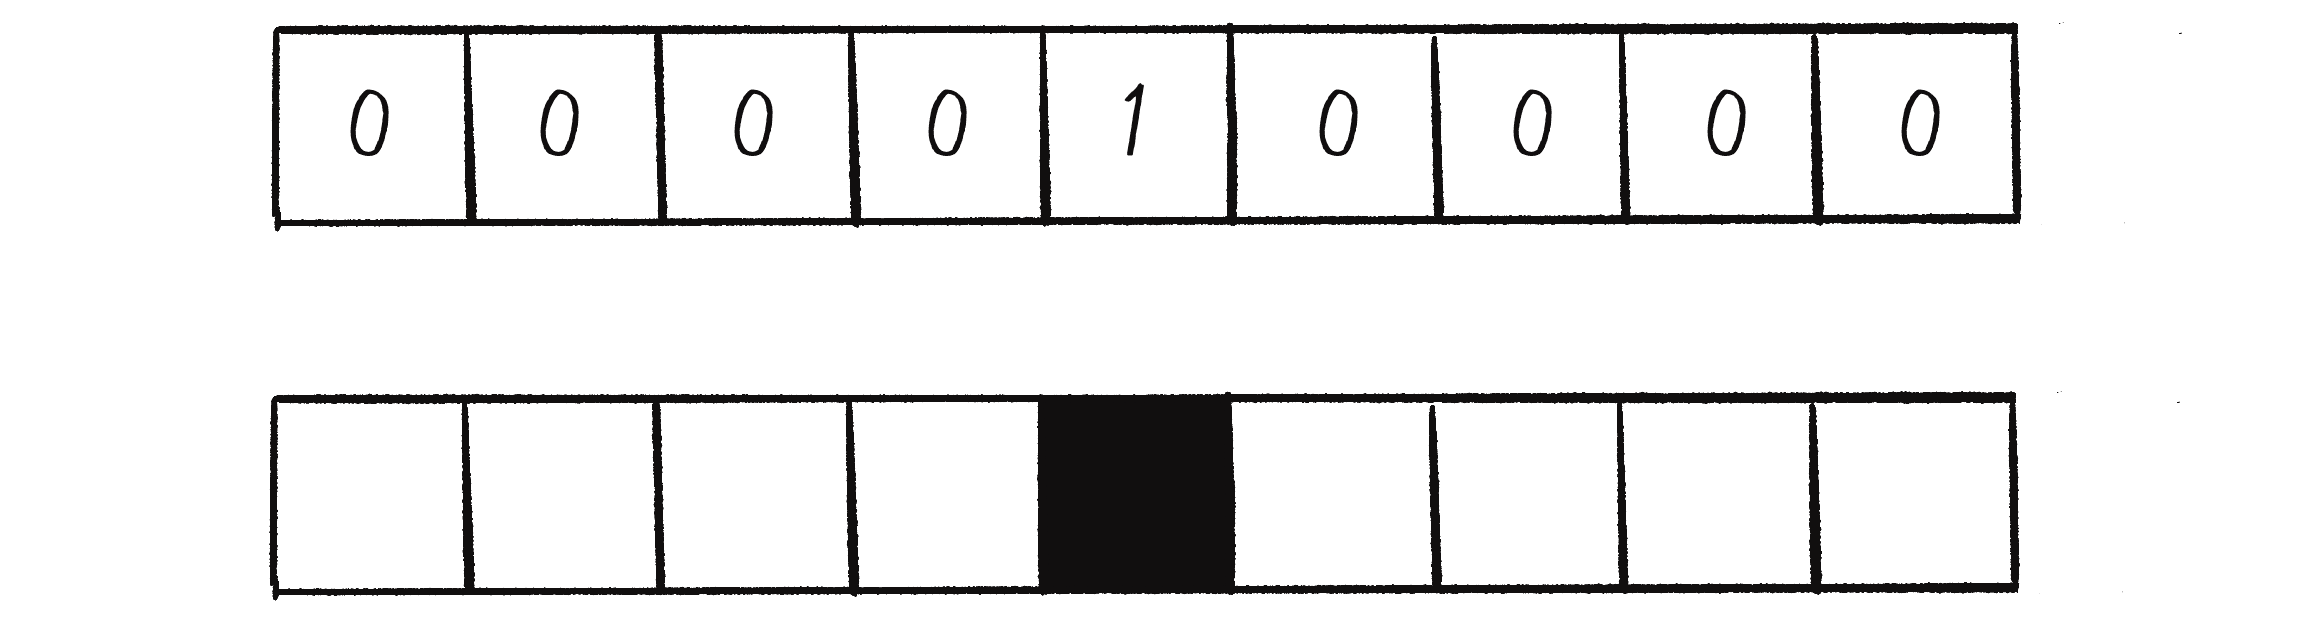 Figure 7.11: A white cell indicates 0, and a black cell indicates 1.